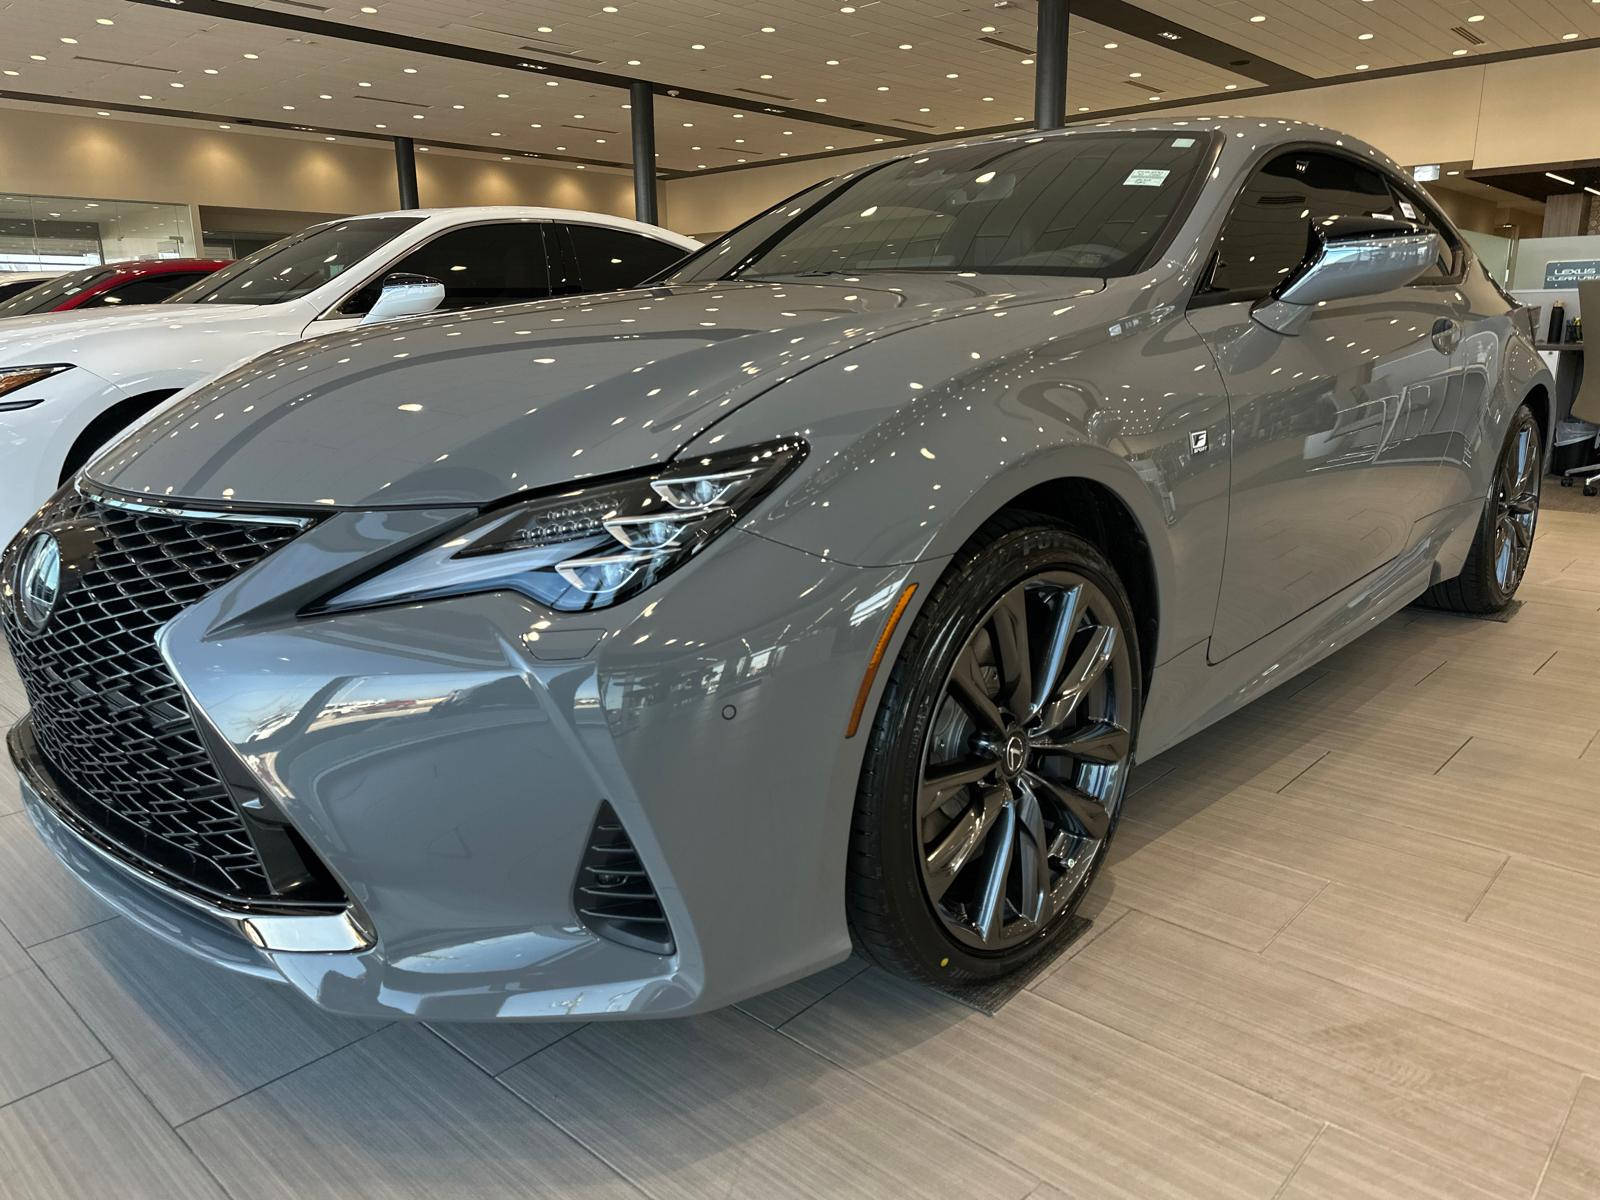 New 2023 Lexus RC 350 F SPORT 2dr Car in Houston #P5026593 | Sterling  McCall Lexus Clear Lake